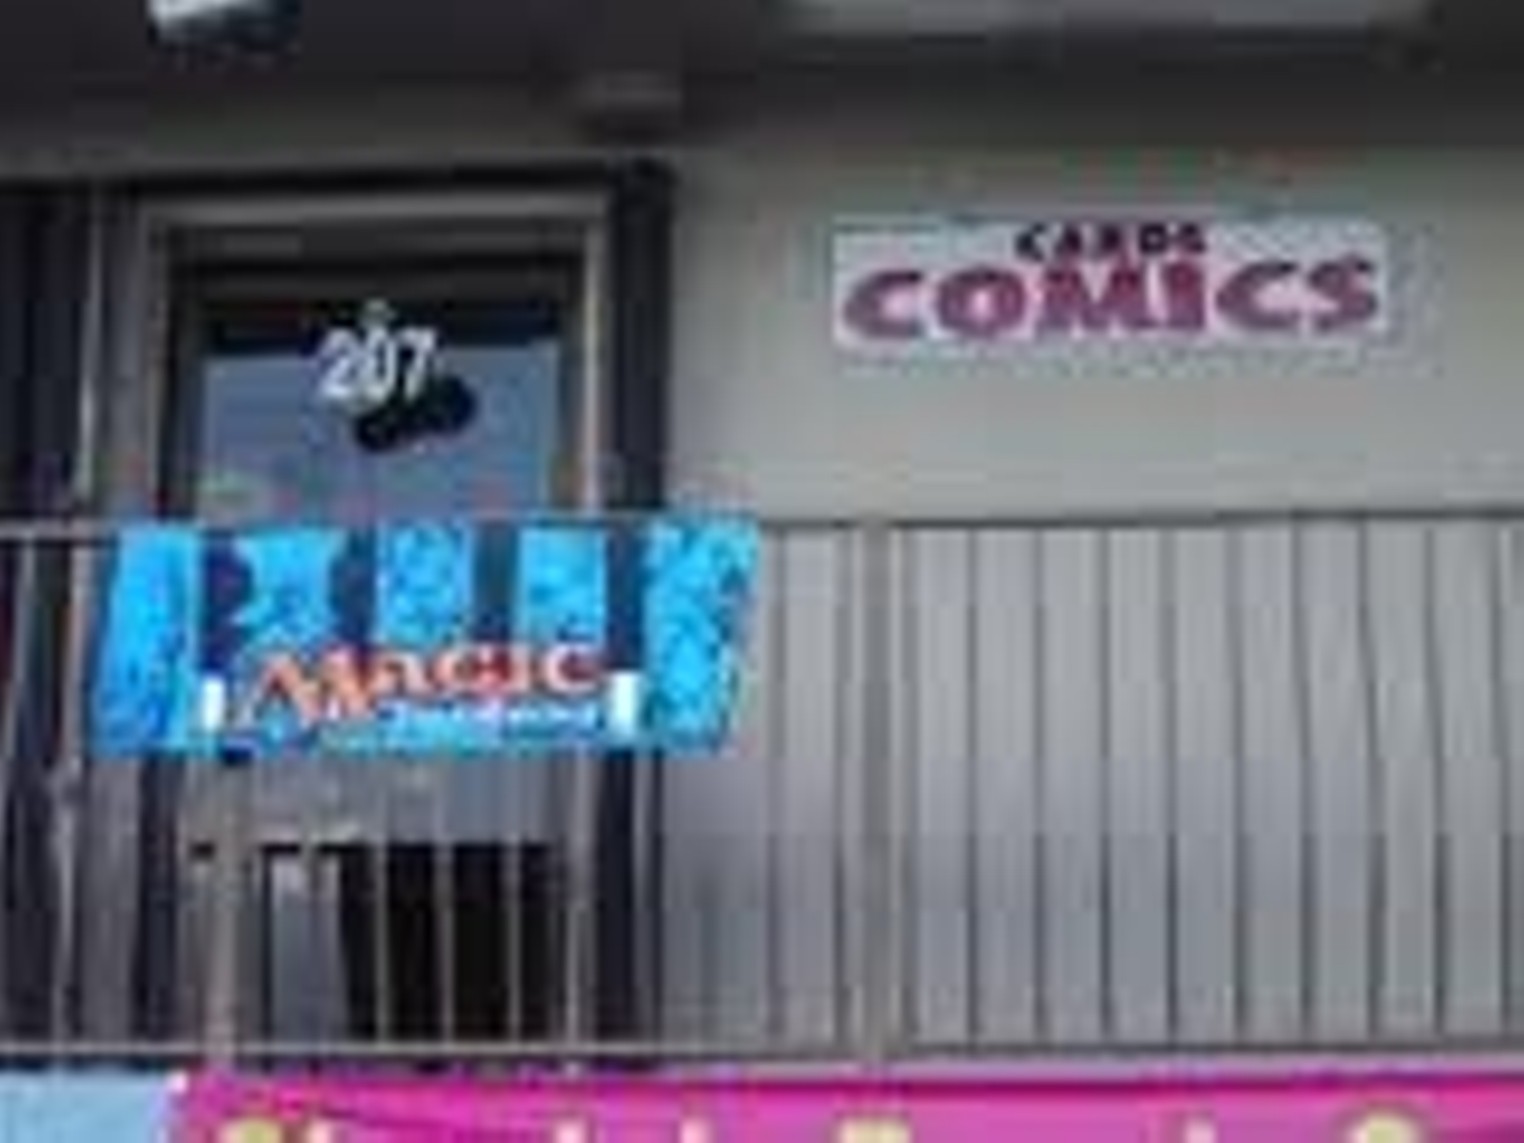 Best Collectibles Shop 2008 Ultimate Cards and Comics Best Restaurants, Bars, Clubs, Music and Stores in Miami Miami New Times pic